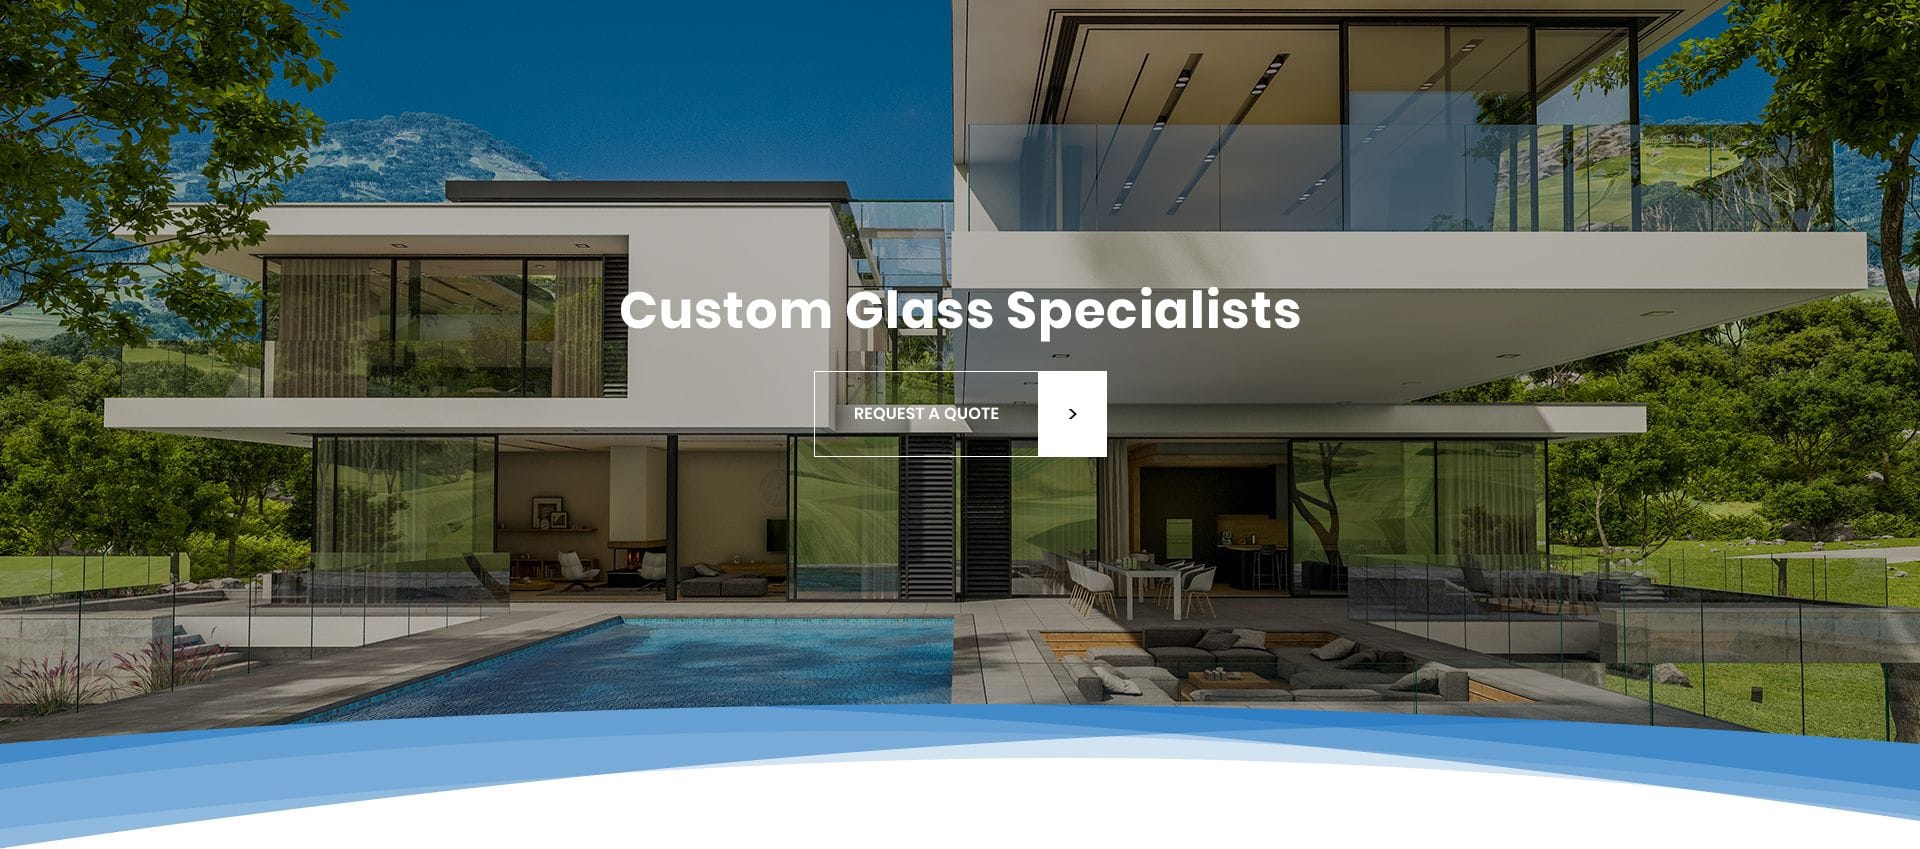 Request a quote from Elegant Glass | Custom glass specialists in Canberra